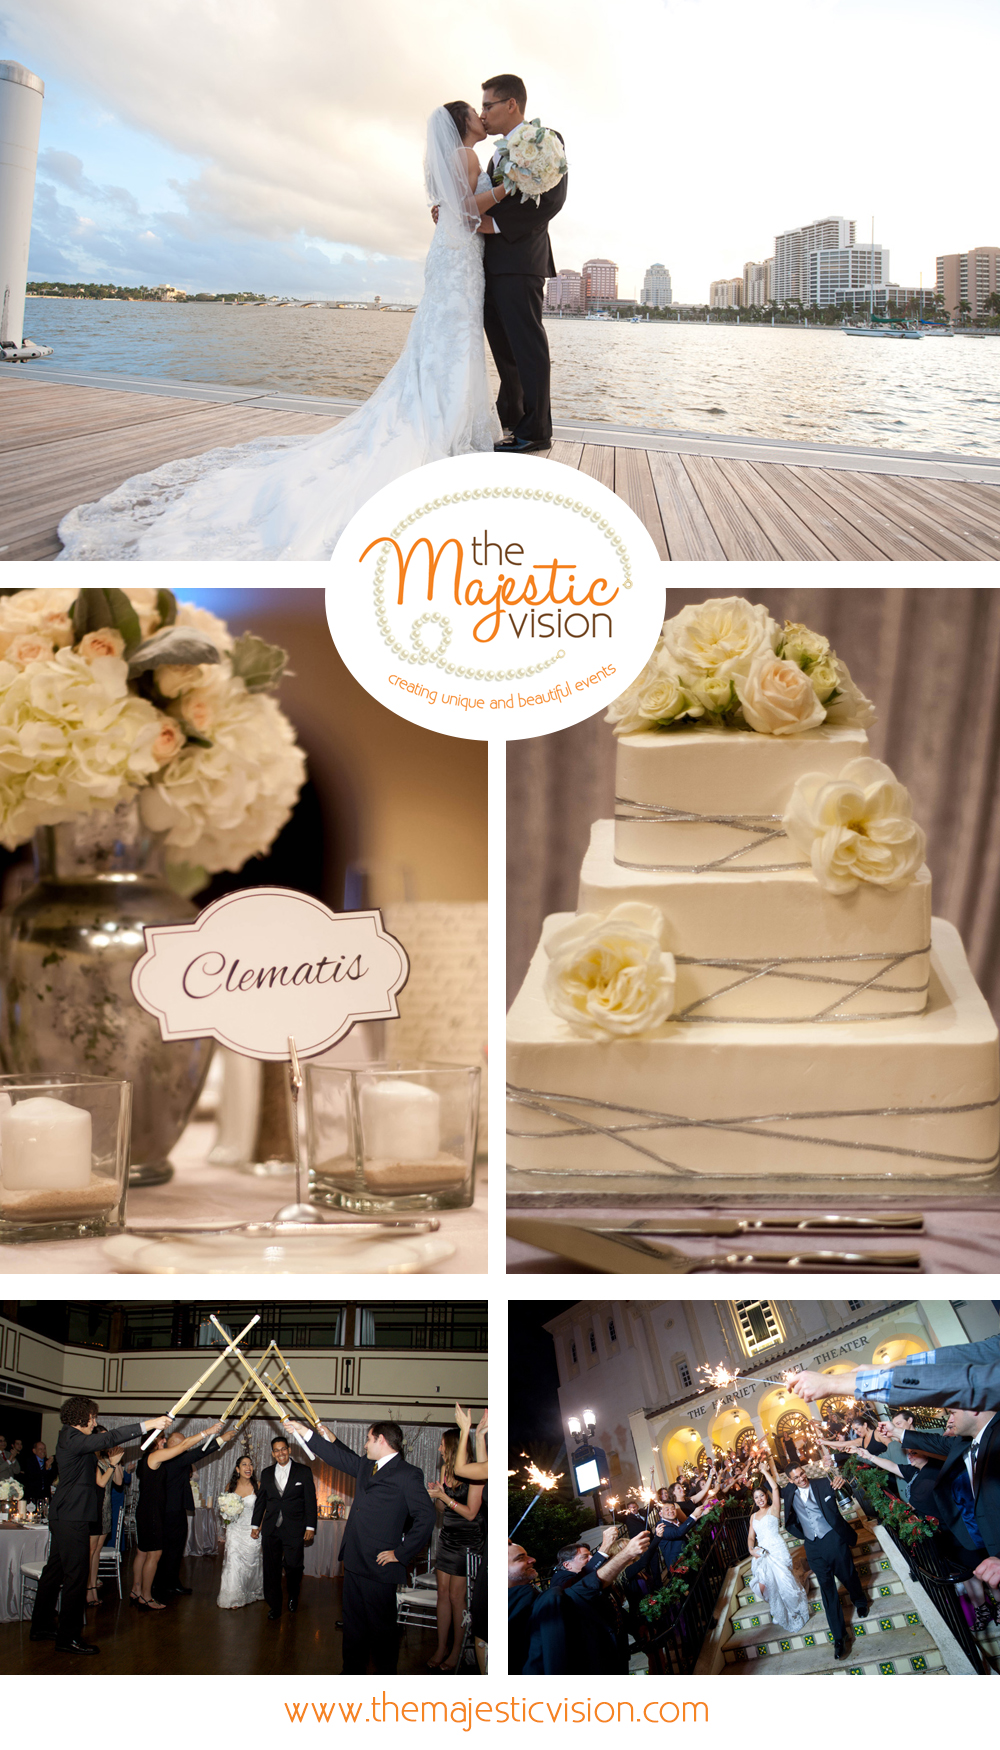 Elegant Silver and White Wedding | The Majestic Vision Wedding Planning |Harriet Himmel Theater in Palm Beach, FL | www.themajesticvision.com